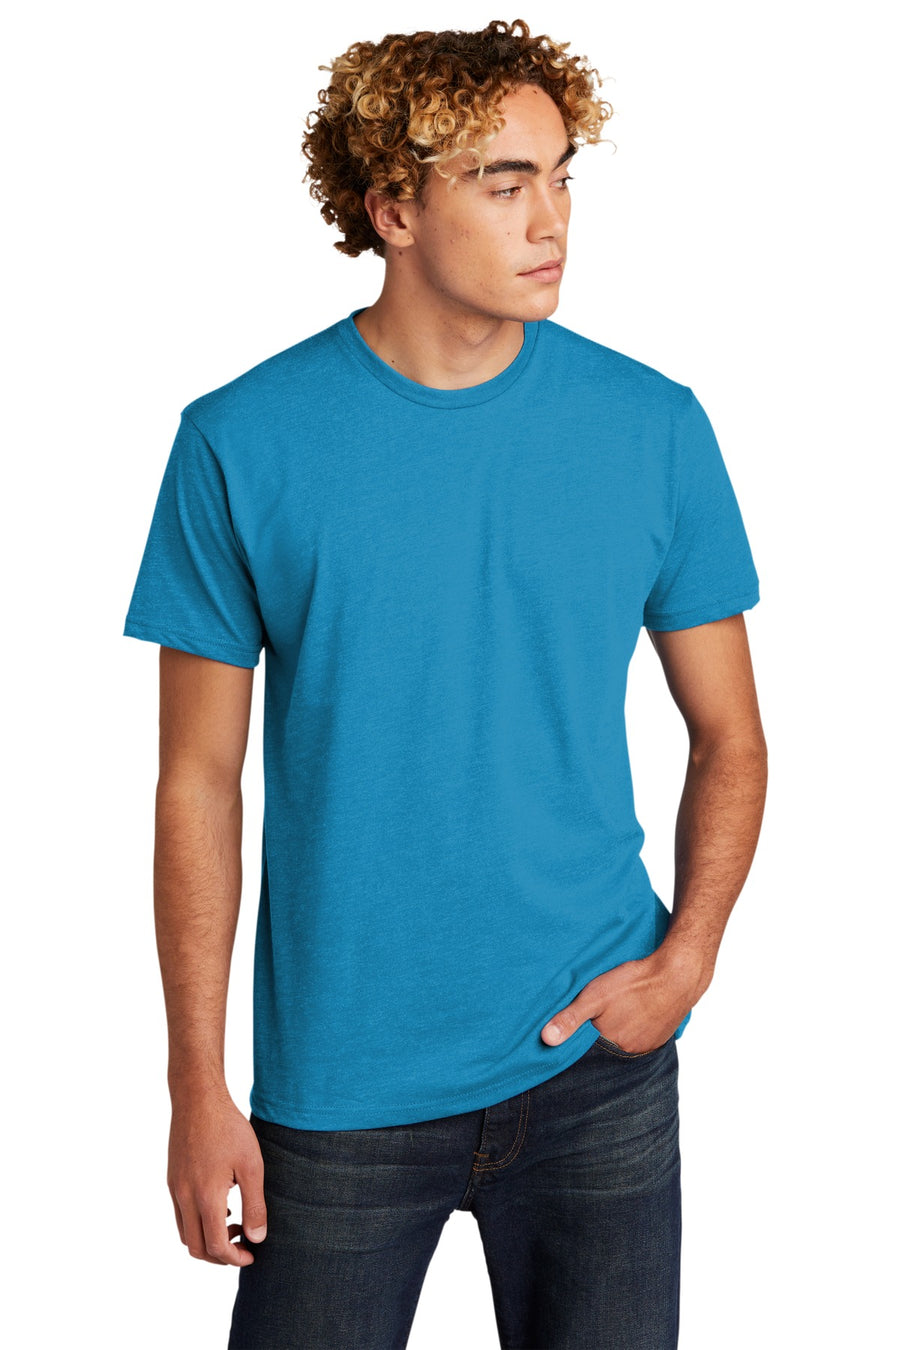 NL6210-Turquoise-front_model